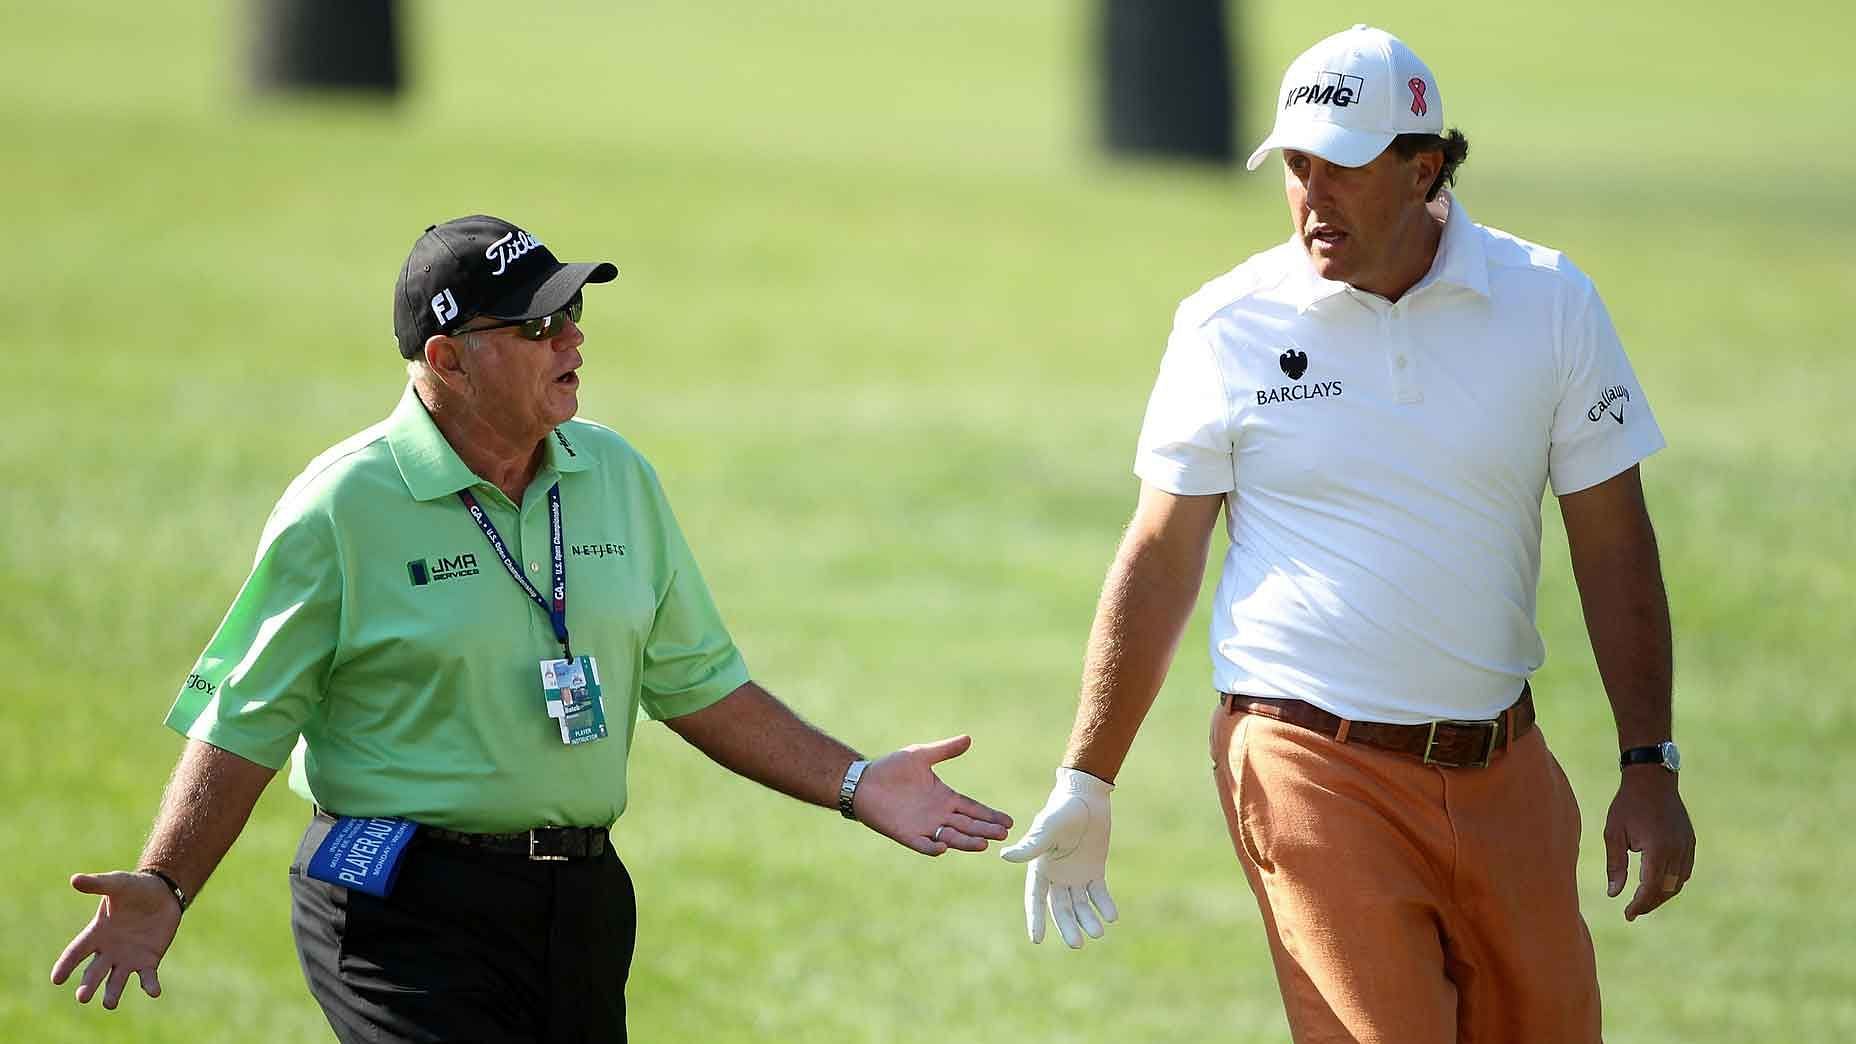 Phil Mickelson and Butch Harmon (Image via Getty)